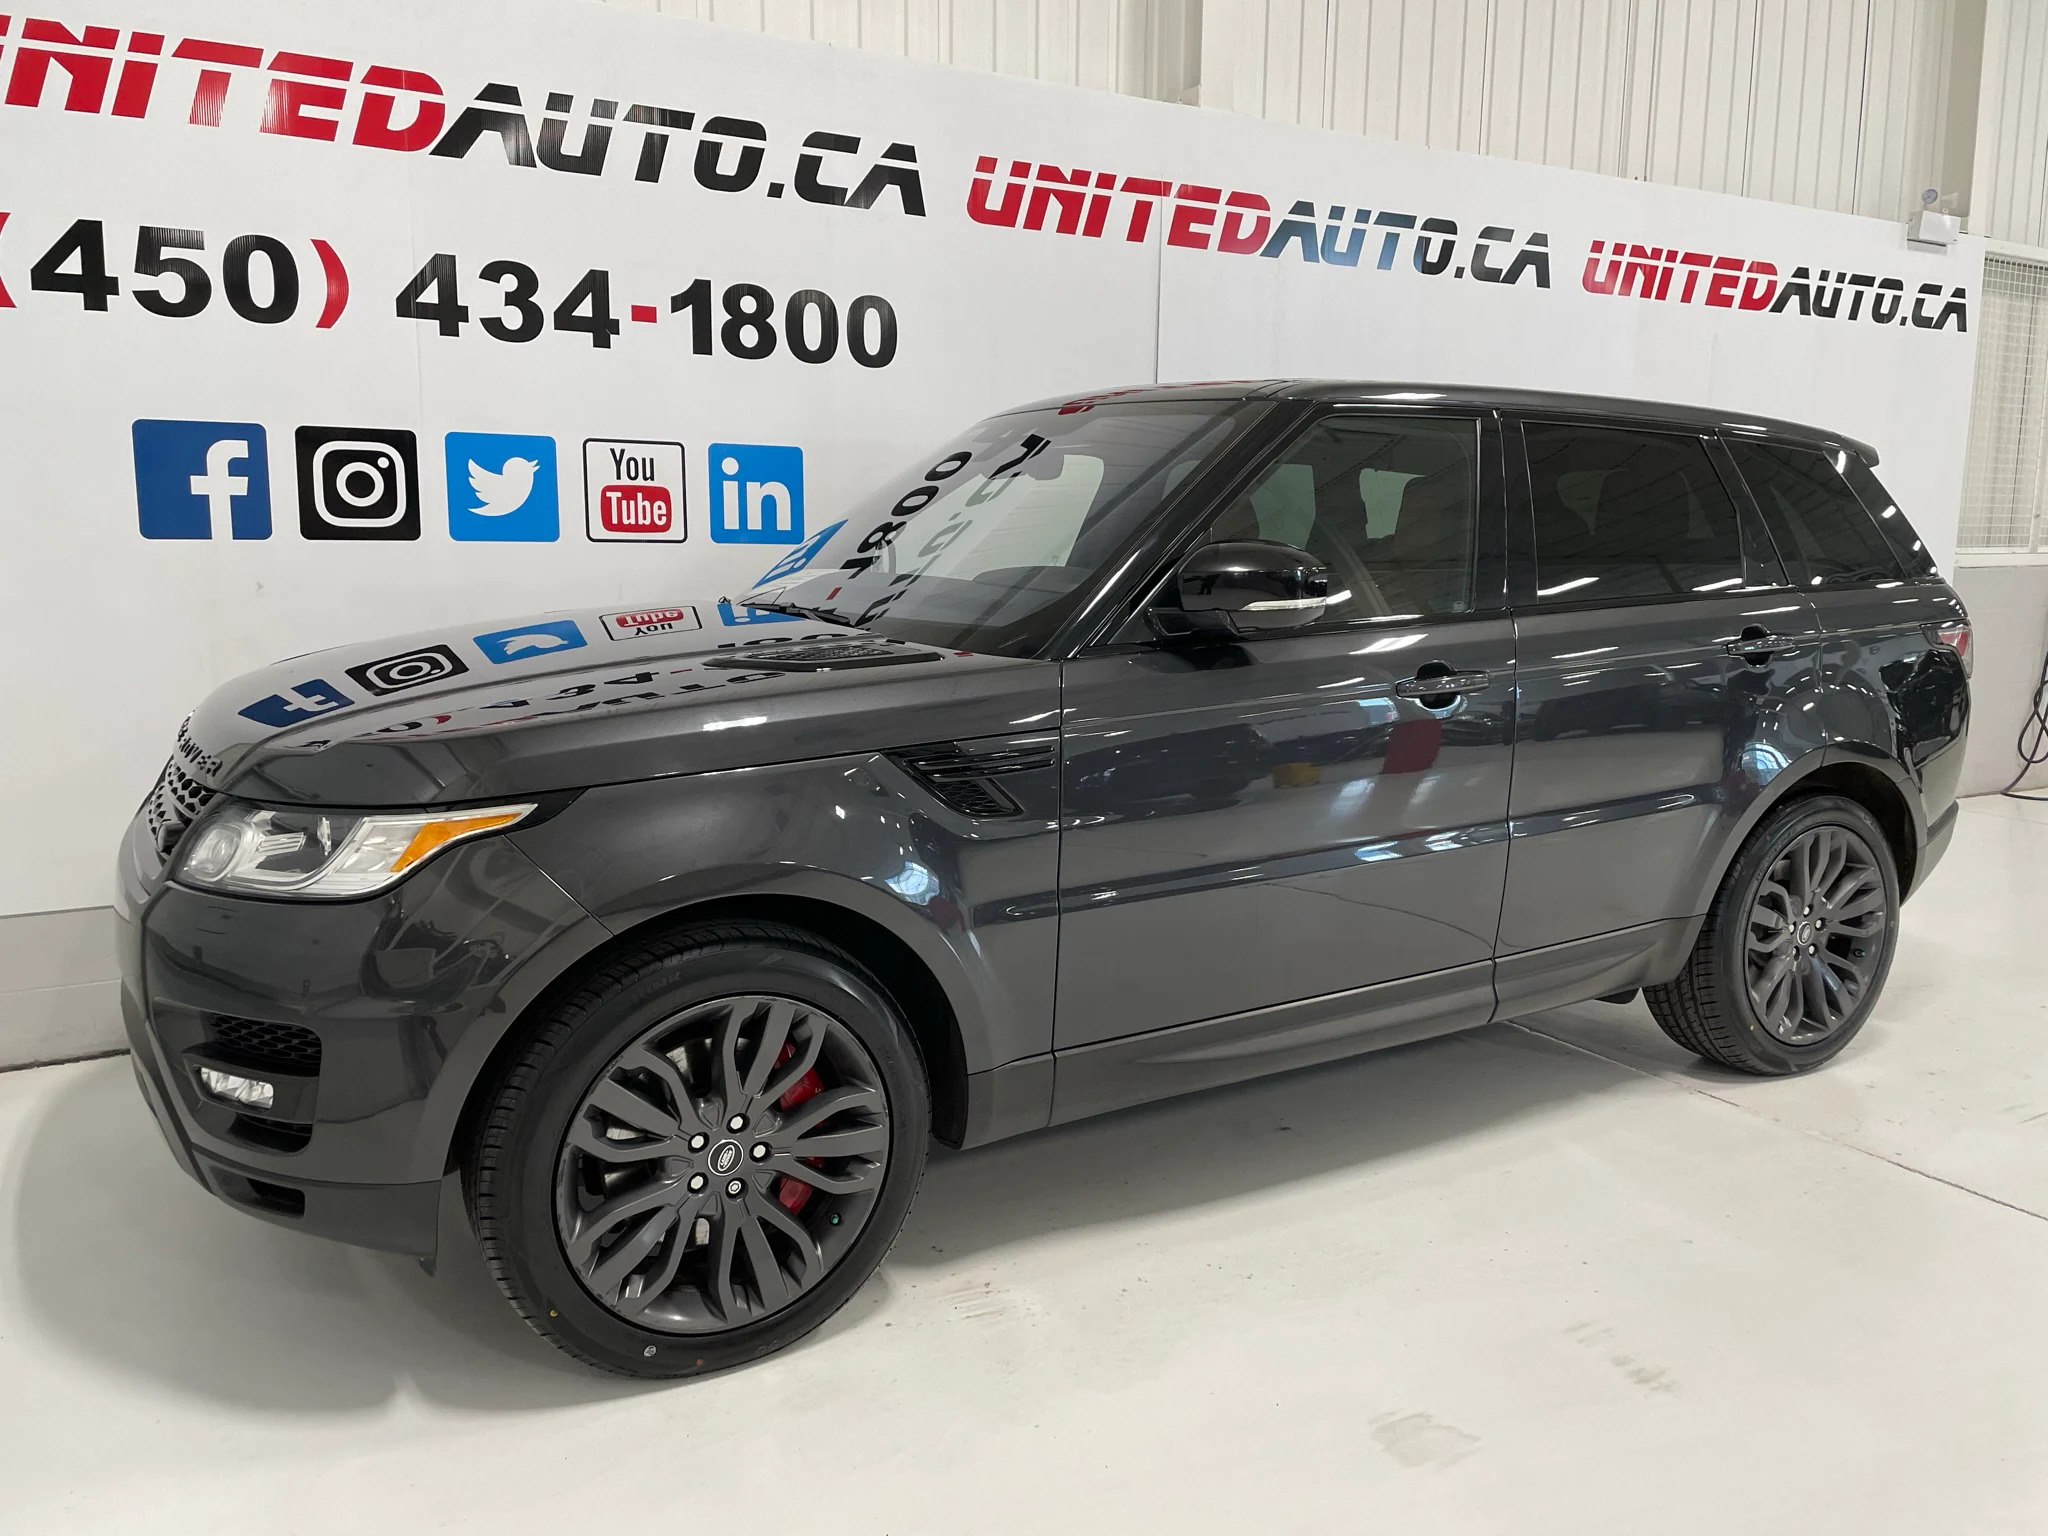 2017 Land Rover Range Rover Sport 4WD V8 Supercharged,TRES BAS MILLAGE